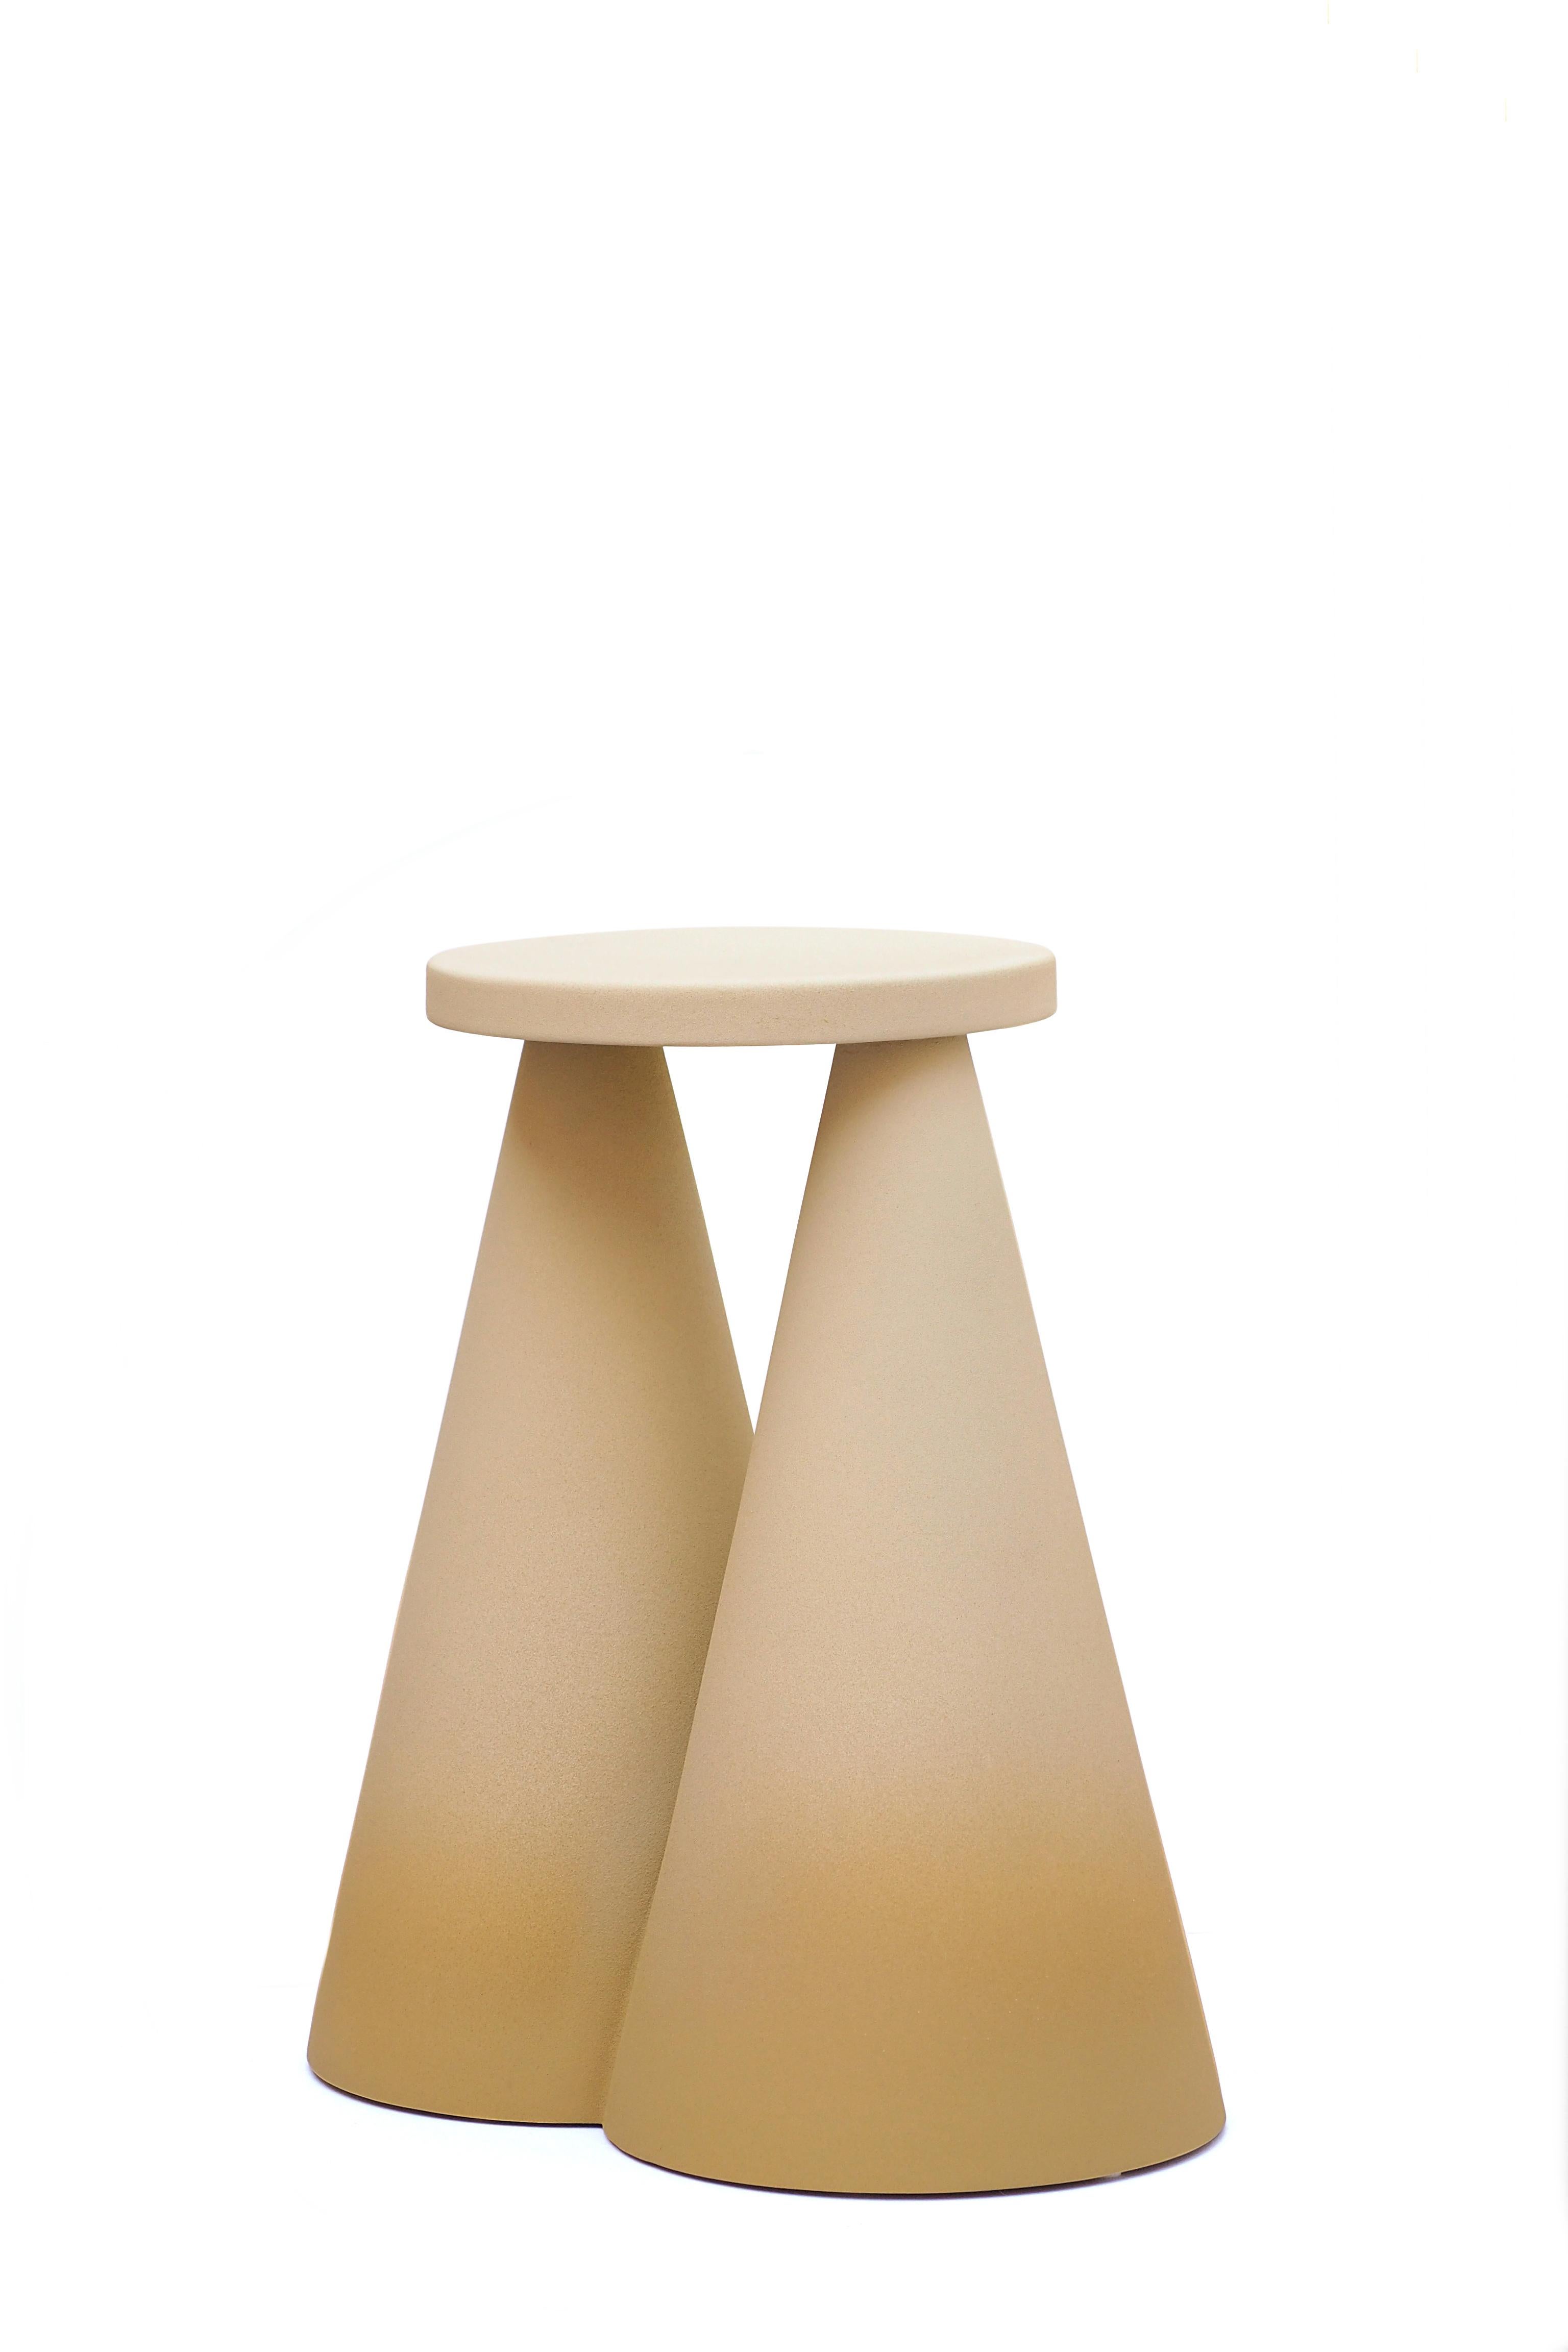 Honey Isola side table by Cara Davide
Dimensions: D 25 x W 43 x H 45 cm 
Materials: Ceramic /Rough touch finishing.
Also available in colors: Honey and Purple.

Isola side table is completely made in ceramic using a high-temperature furnace, to